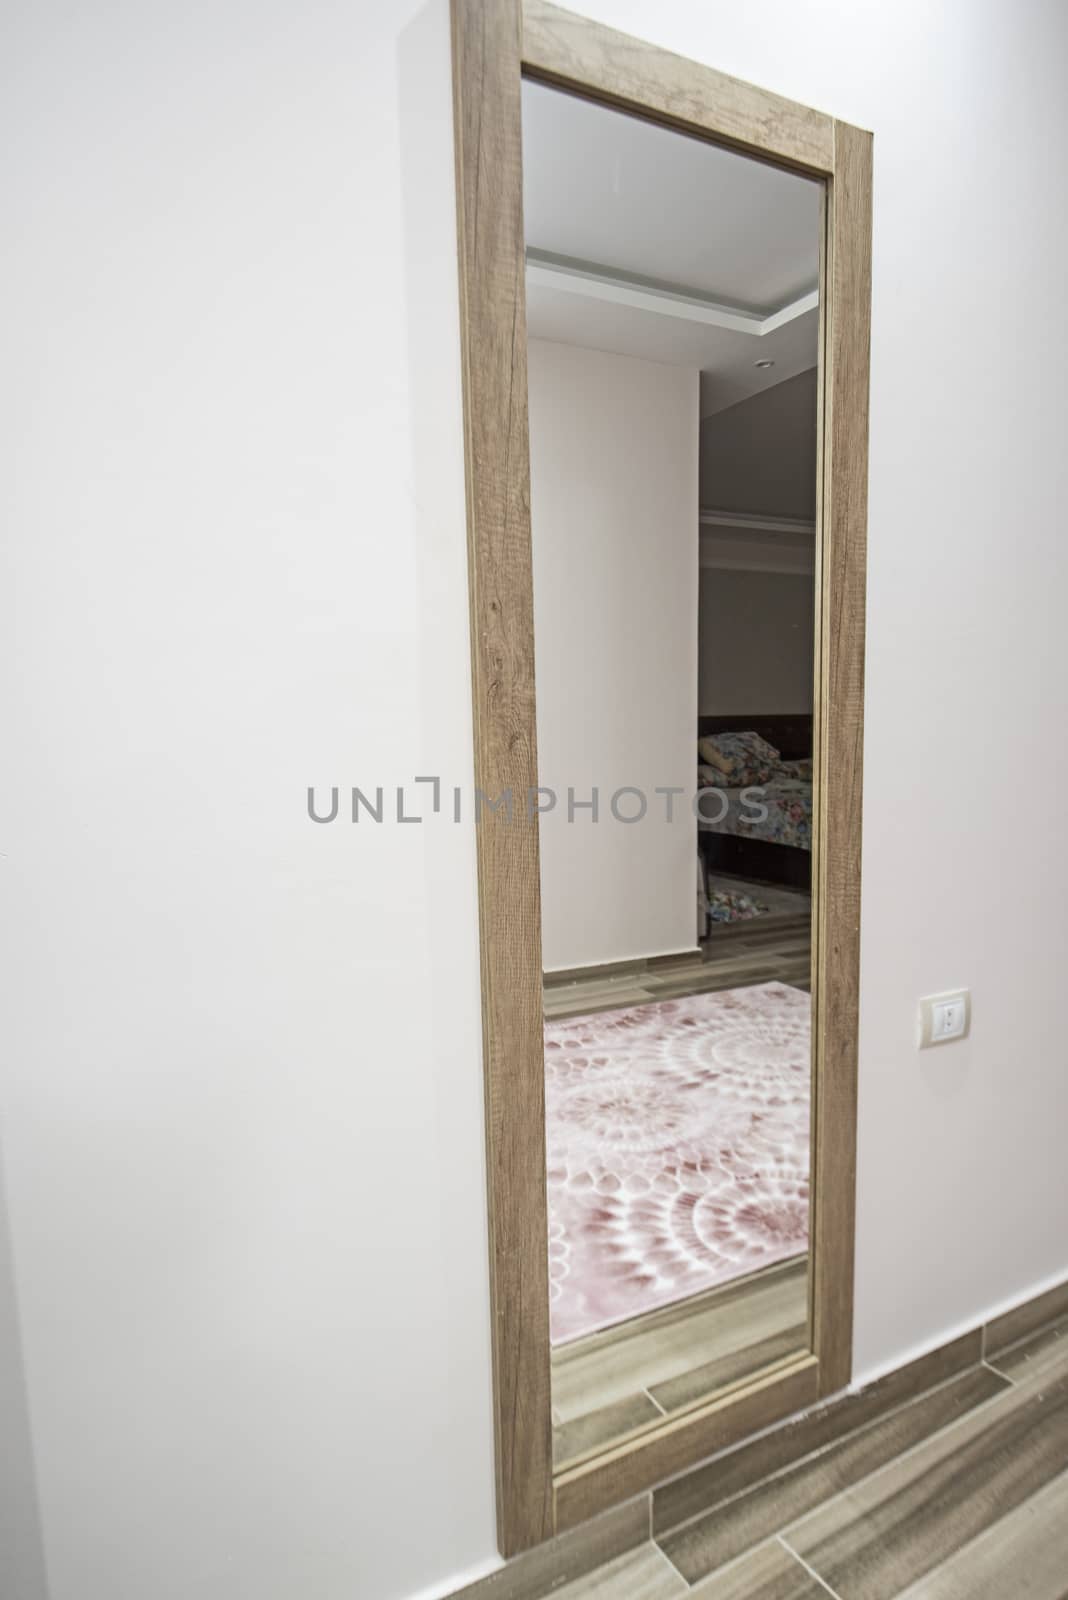 Tall full length mirror hanging on wall in bedroom of luxury home residence with reflection of bed